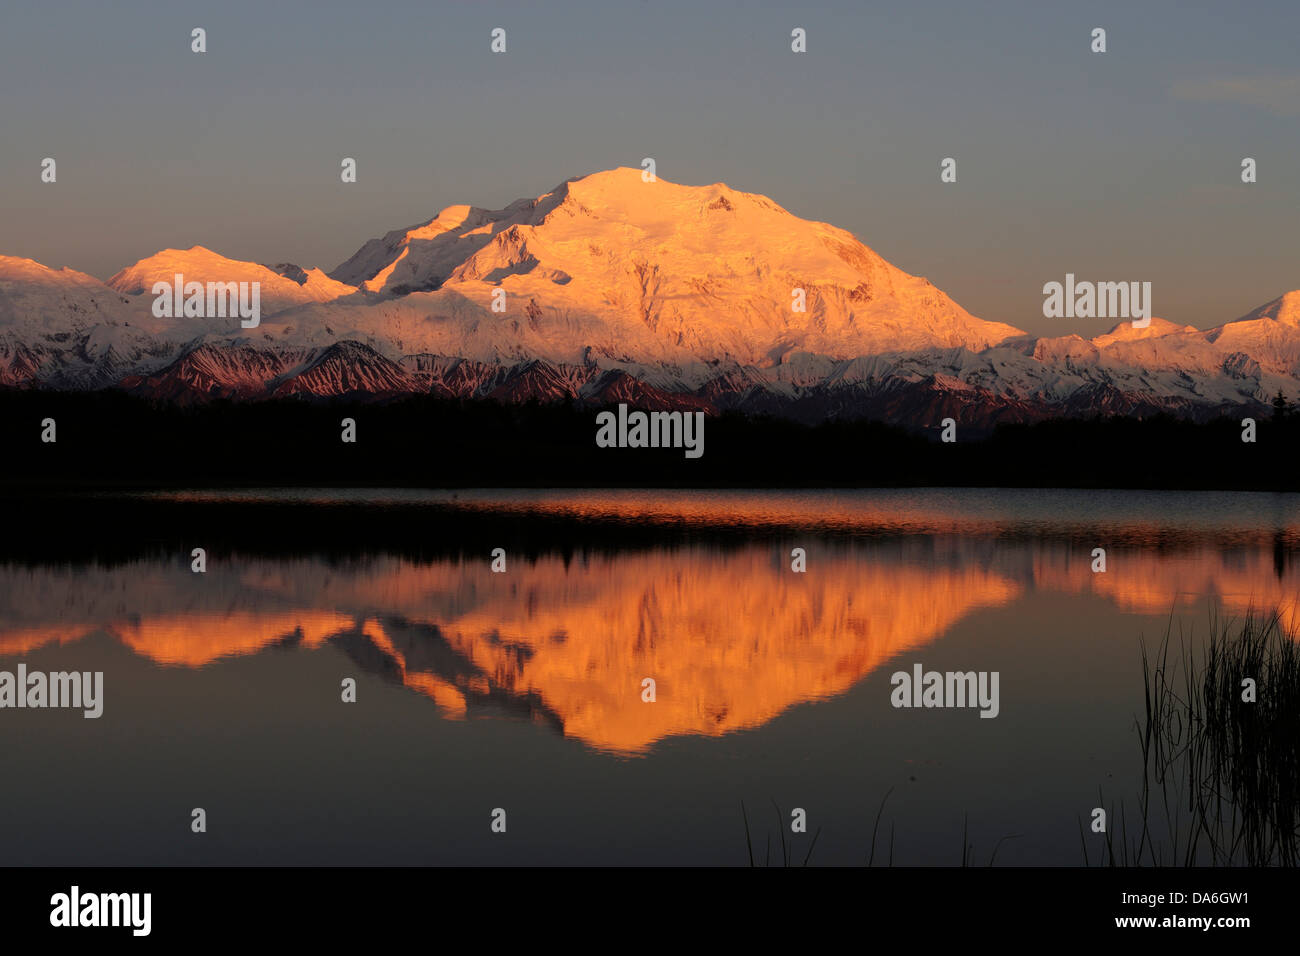 Mt McKinley at sunset, with reflections in Reflection Pond Stock Photo